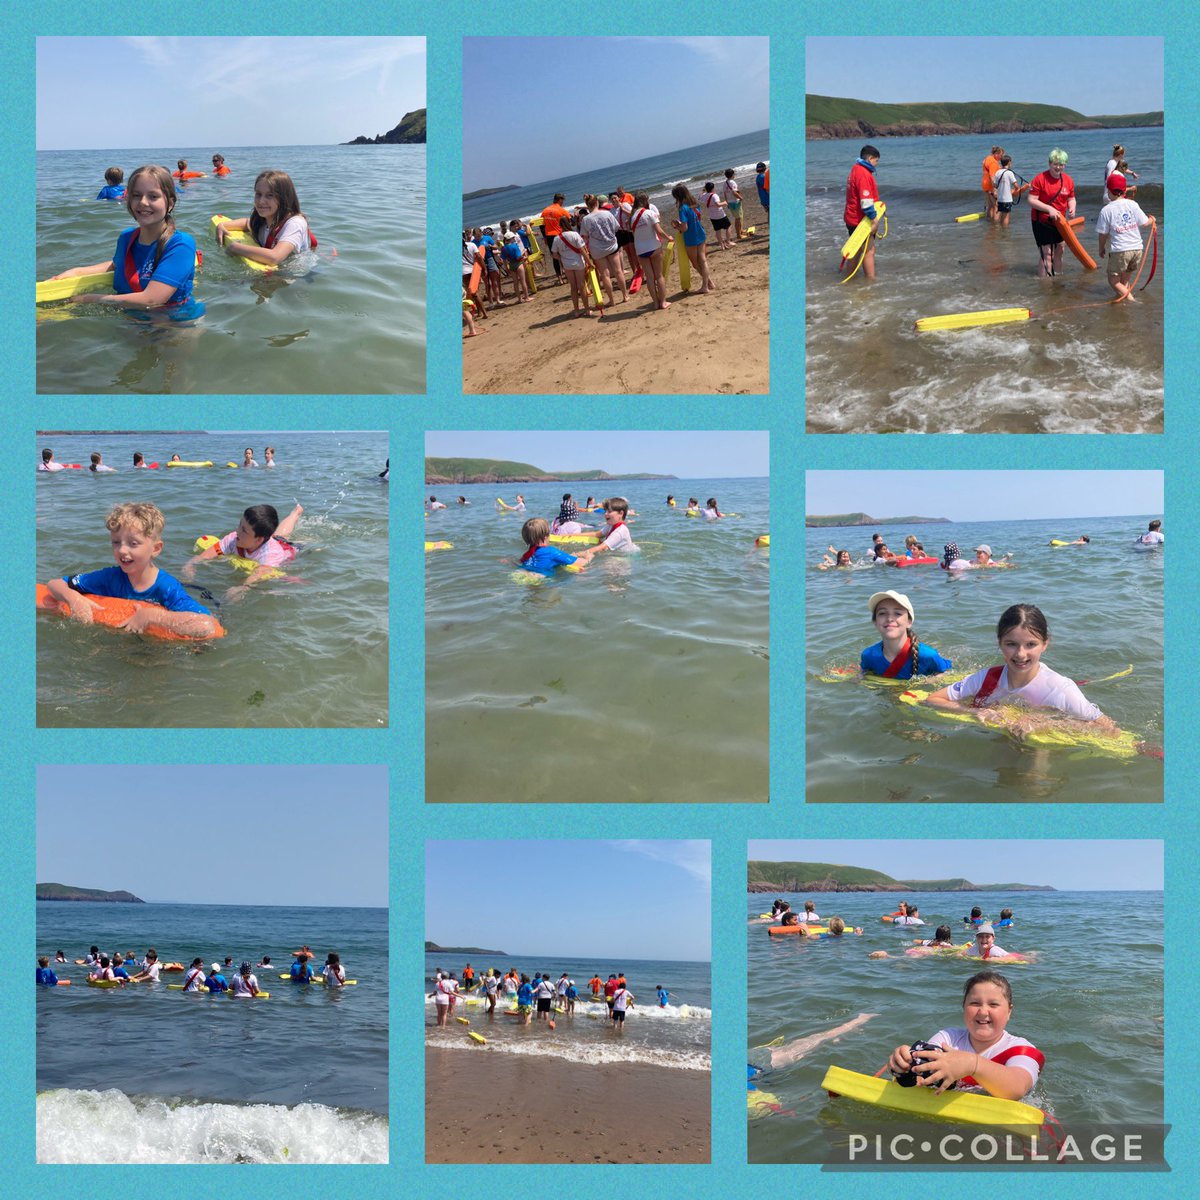 Class 6.1 and 6.2 have also had a fab time at the beach this week, developing their understanding of water safety and the importance of looking after our mental health #HealthyConfidentIndividuals